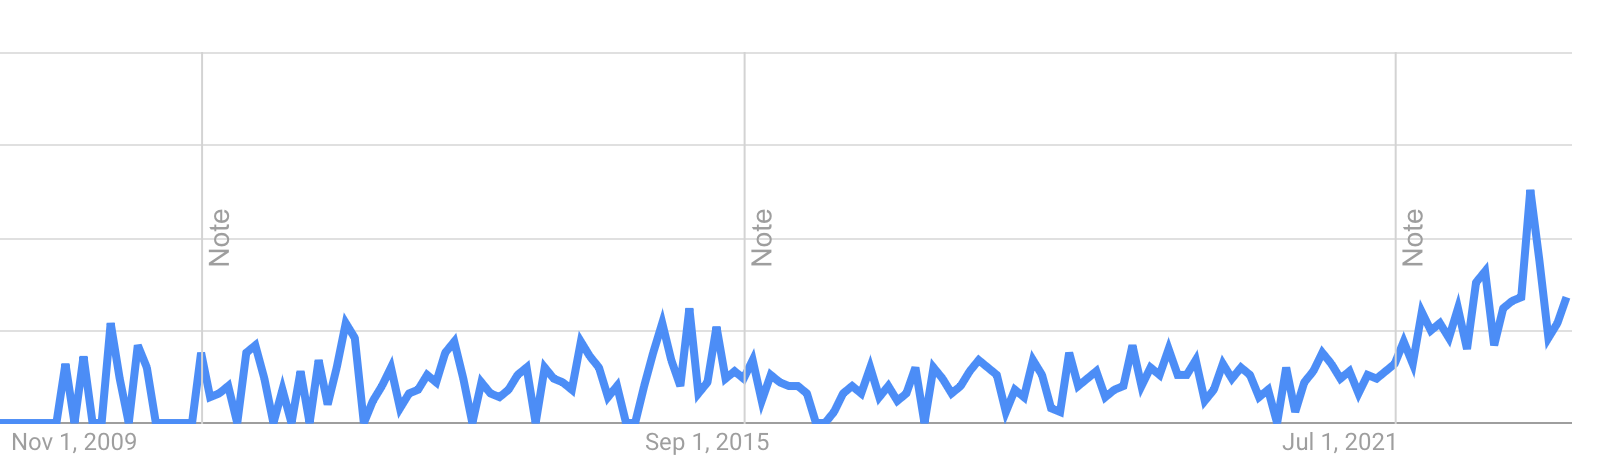 Google Trends for “Semantic Layer” since 2009 